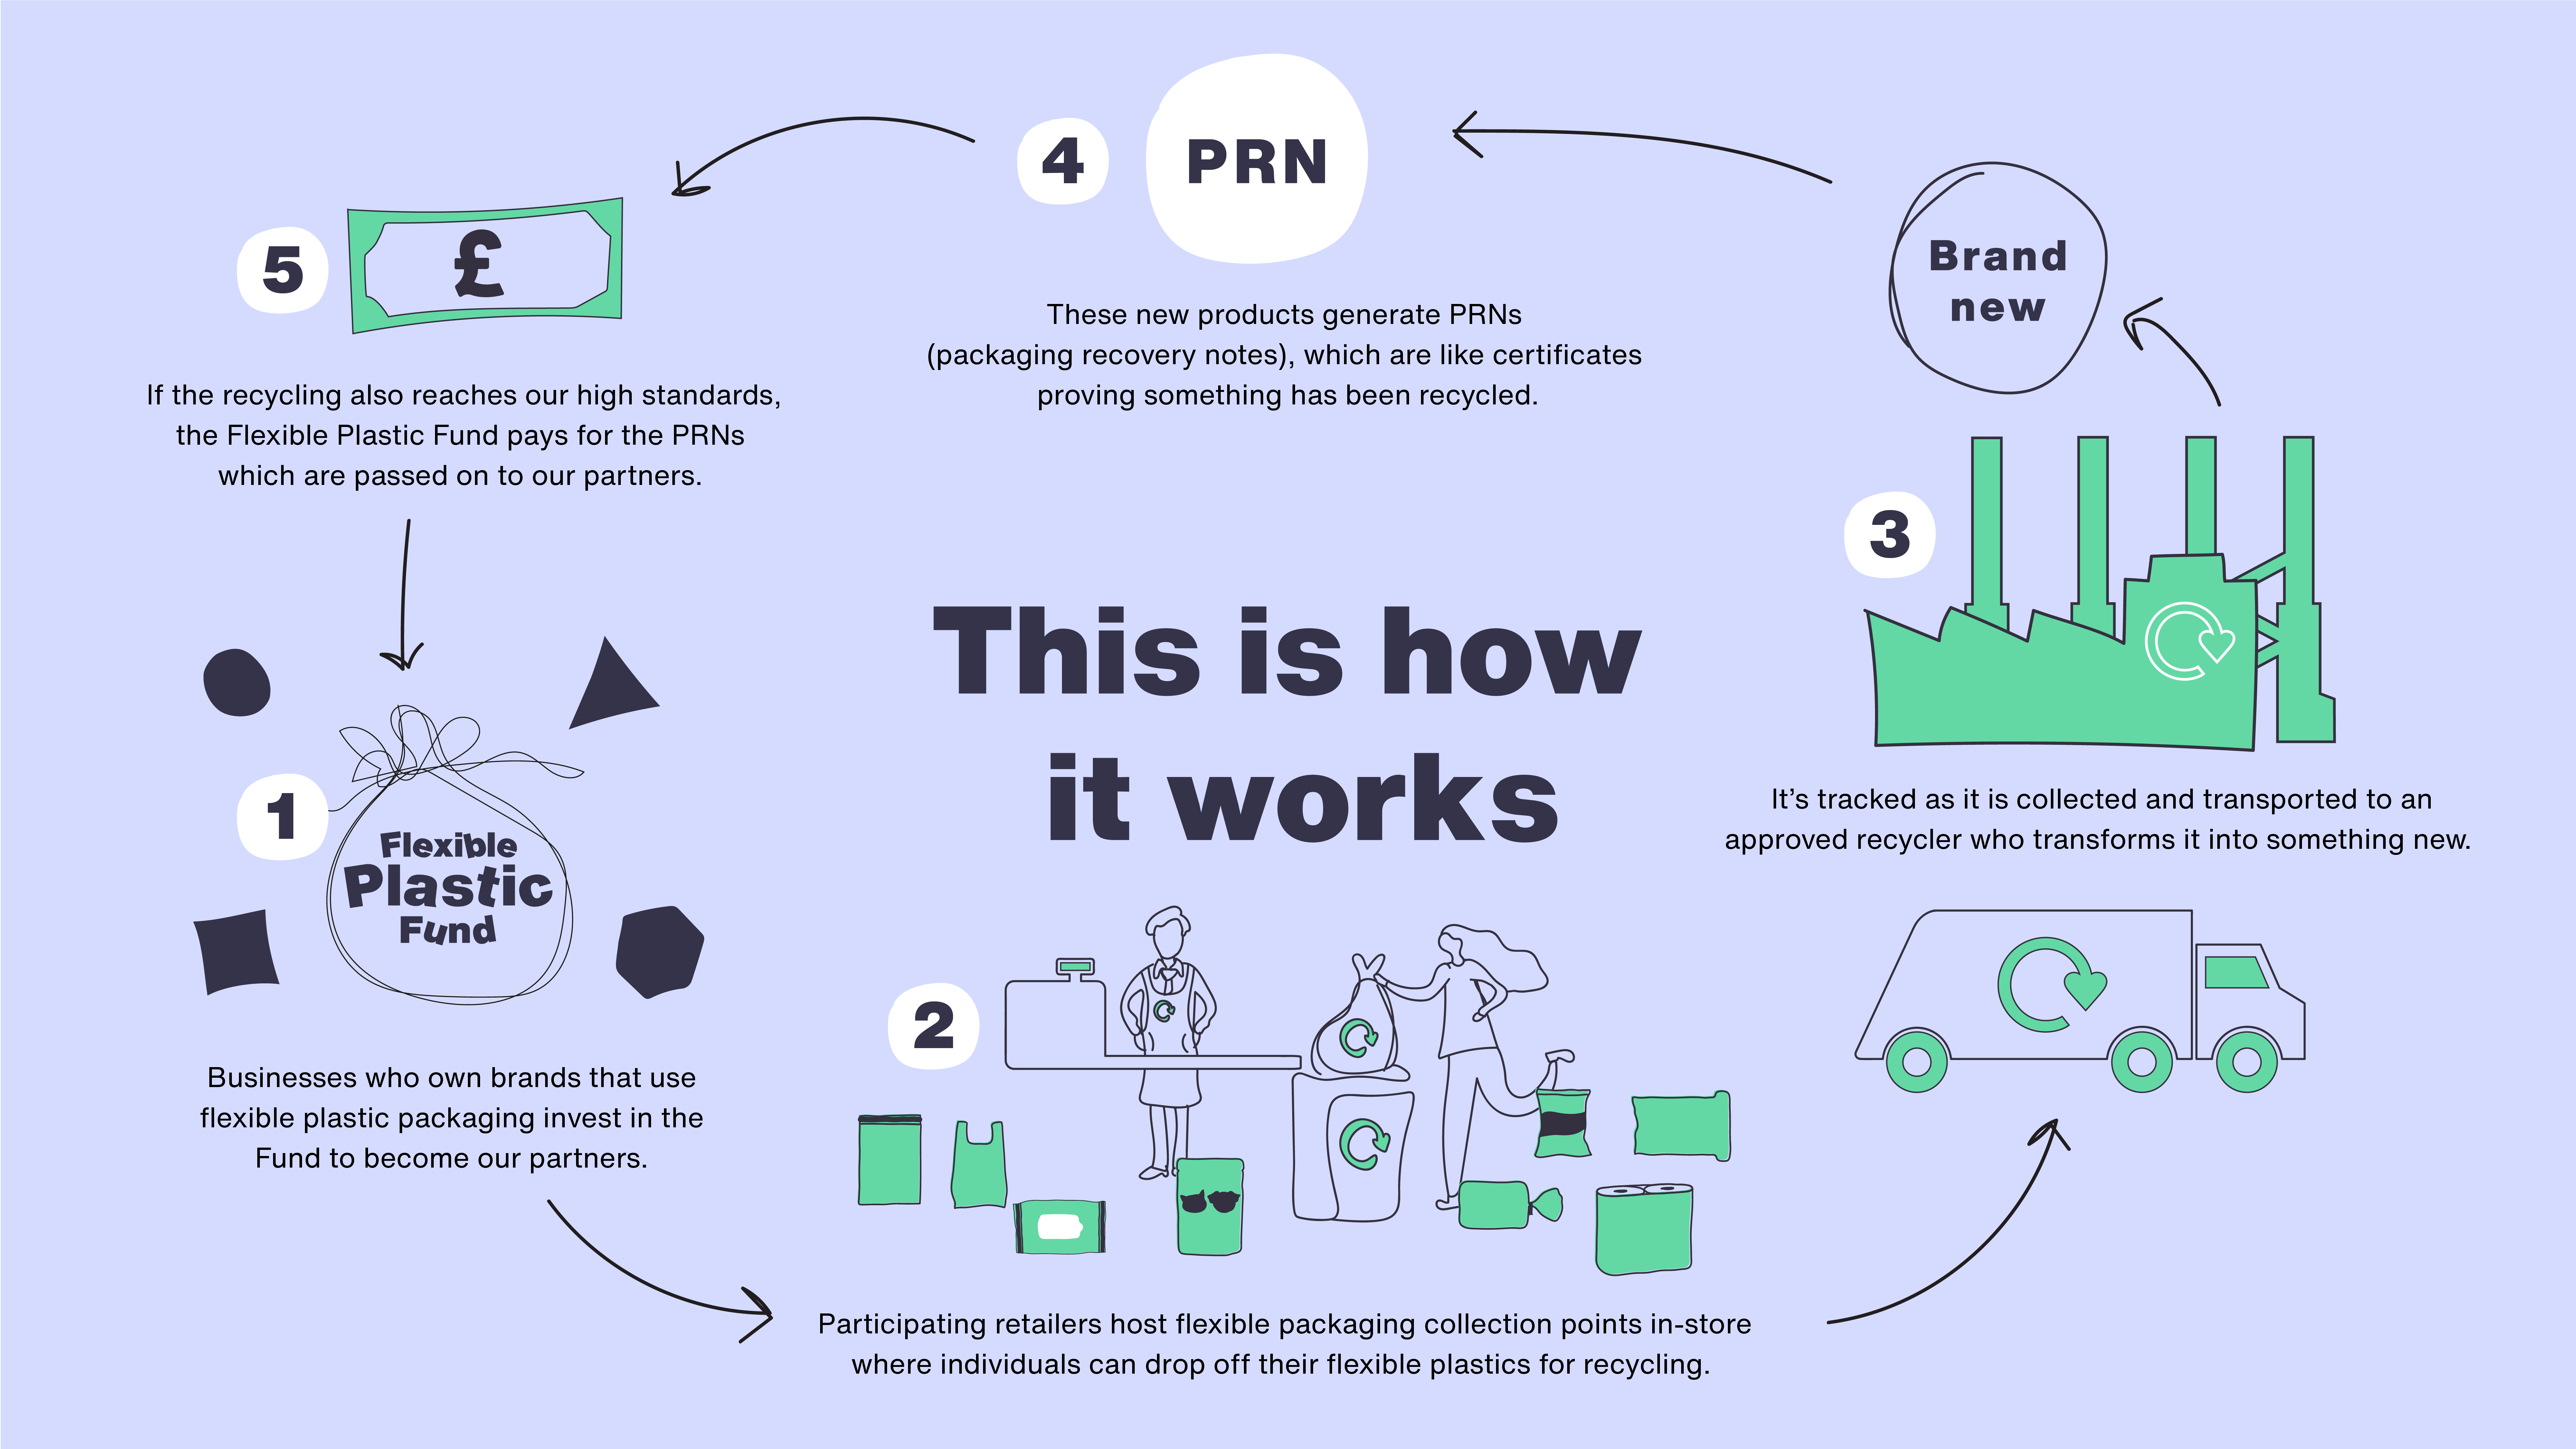 This is how it works infographic.